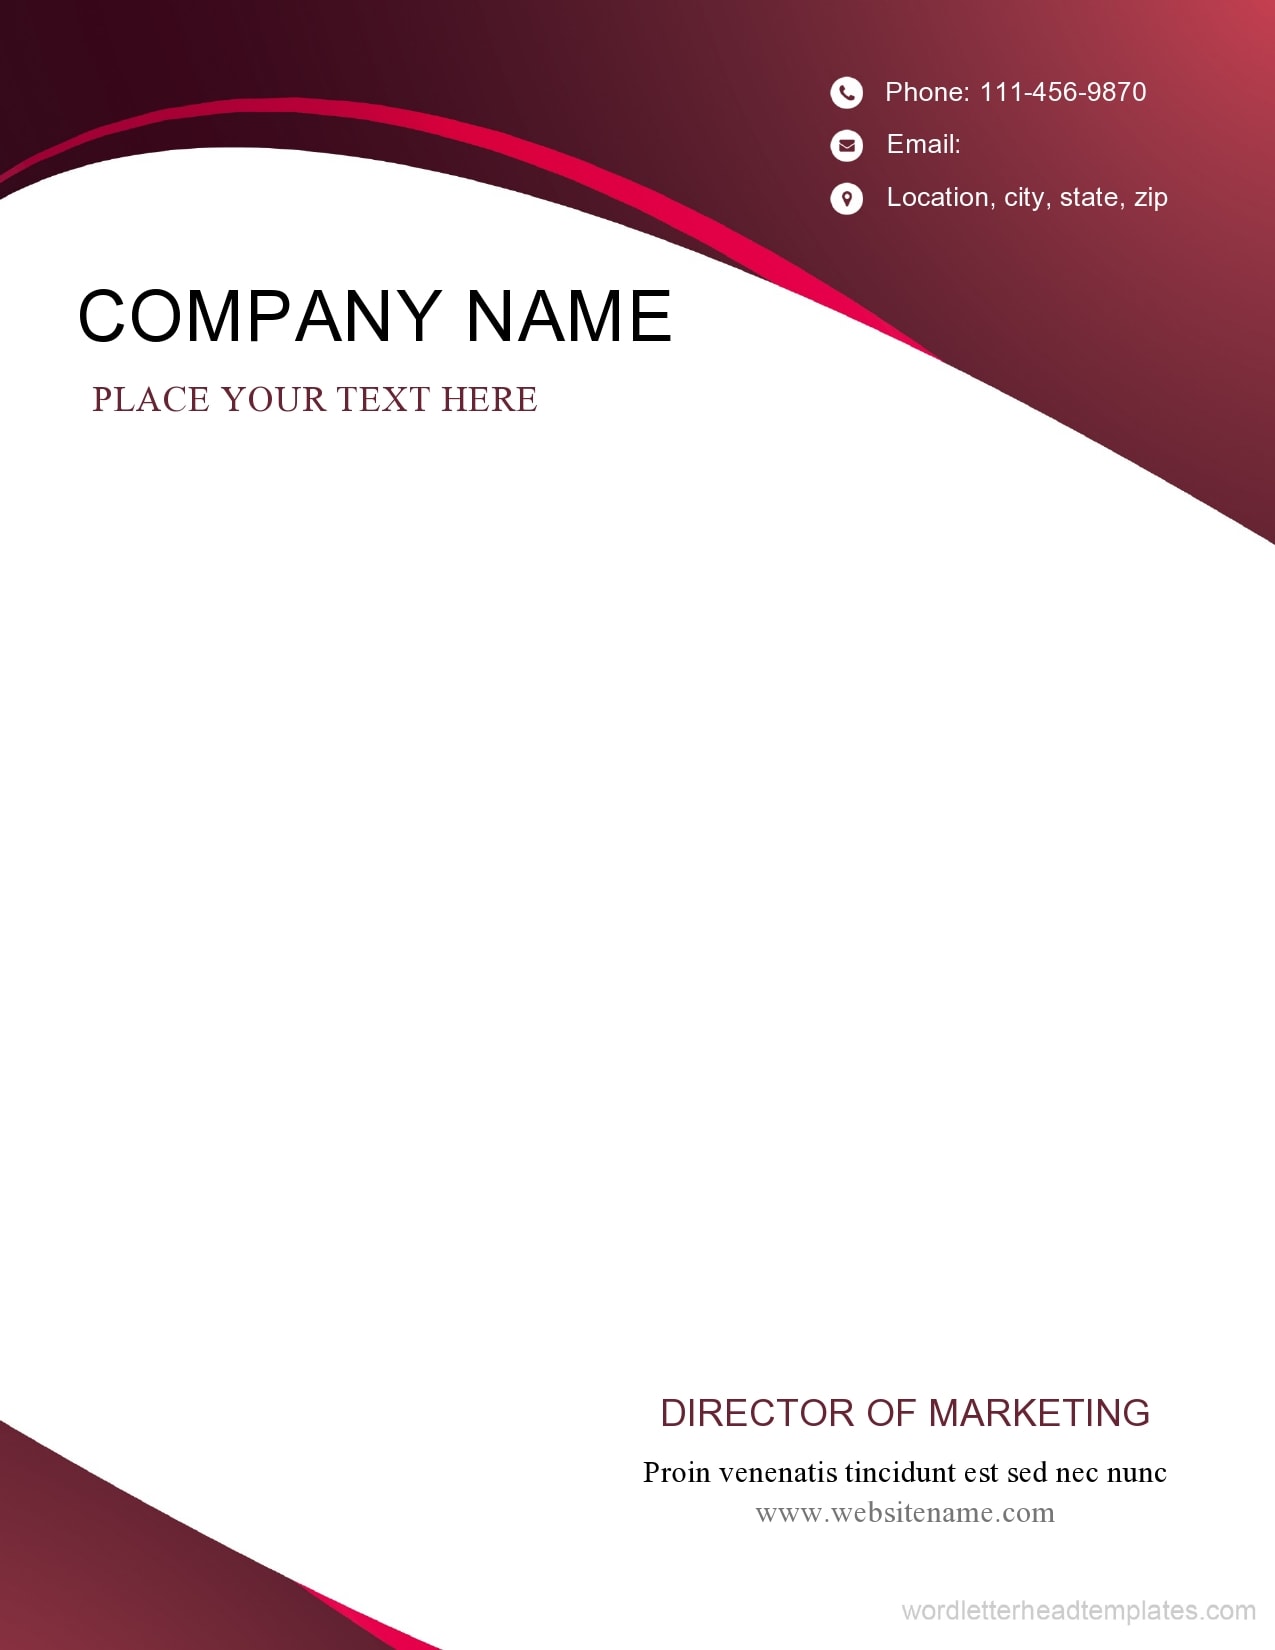 Professional Letterhead Formats Examples Templatearchive | My XXX Hot Girl